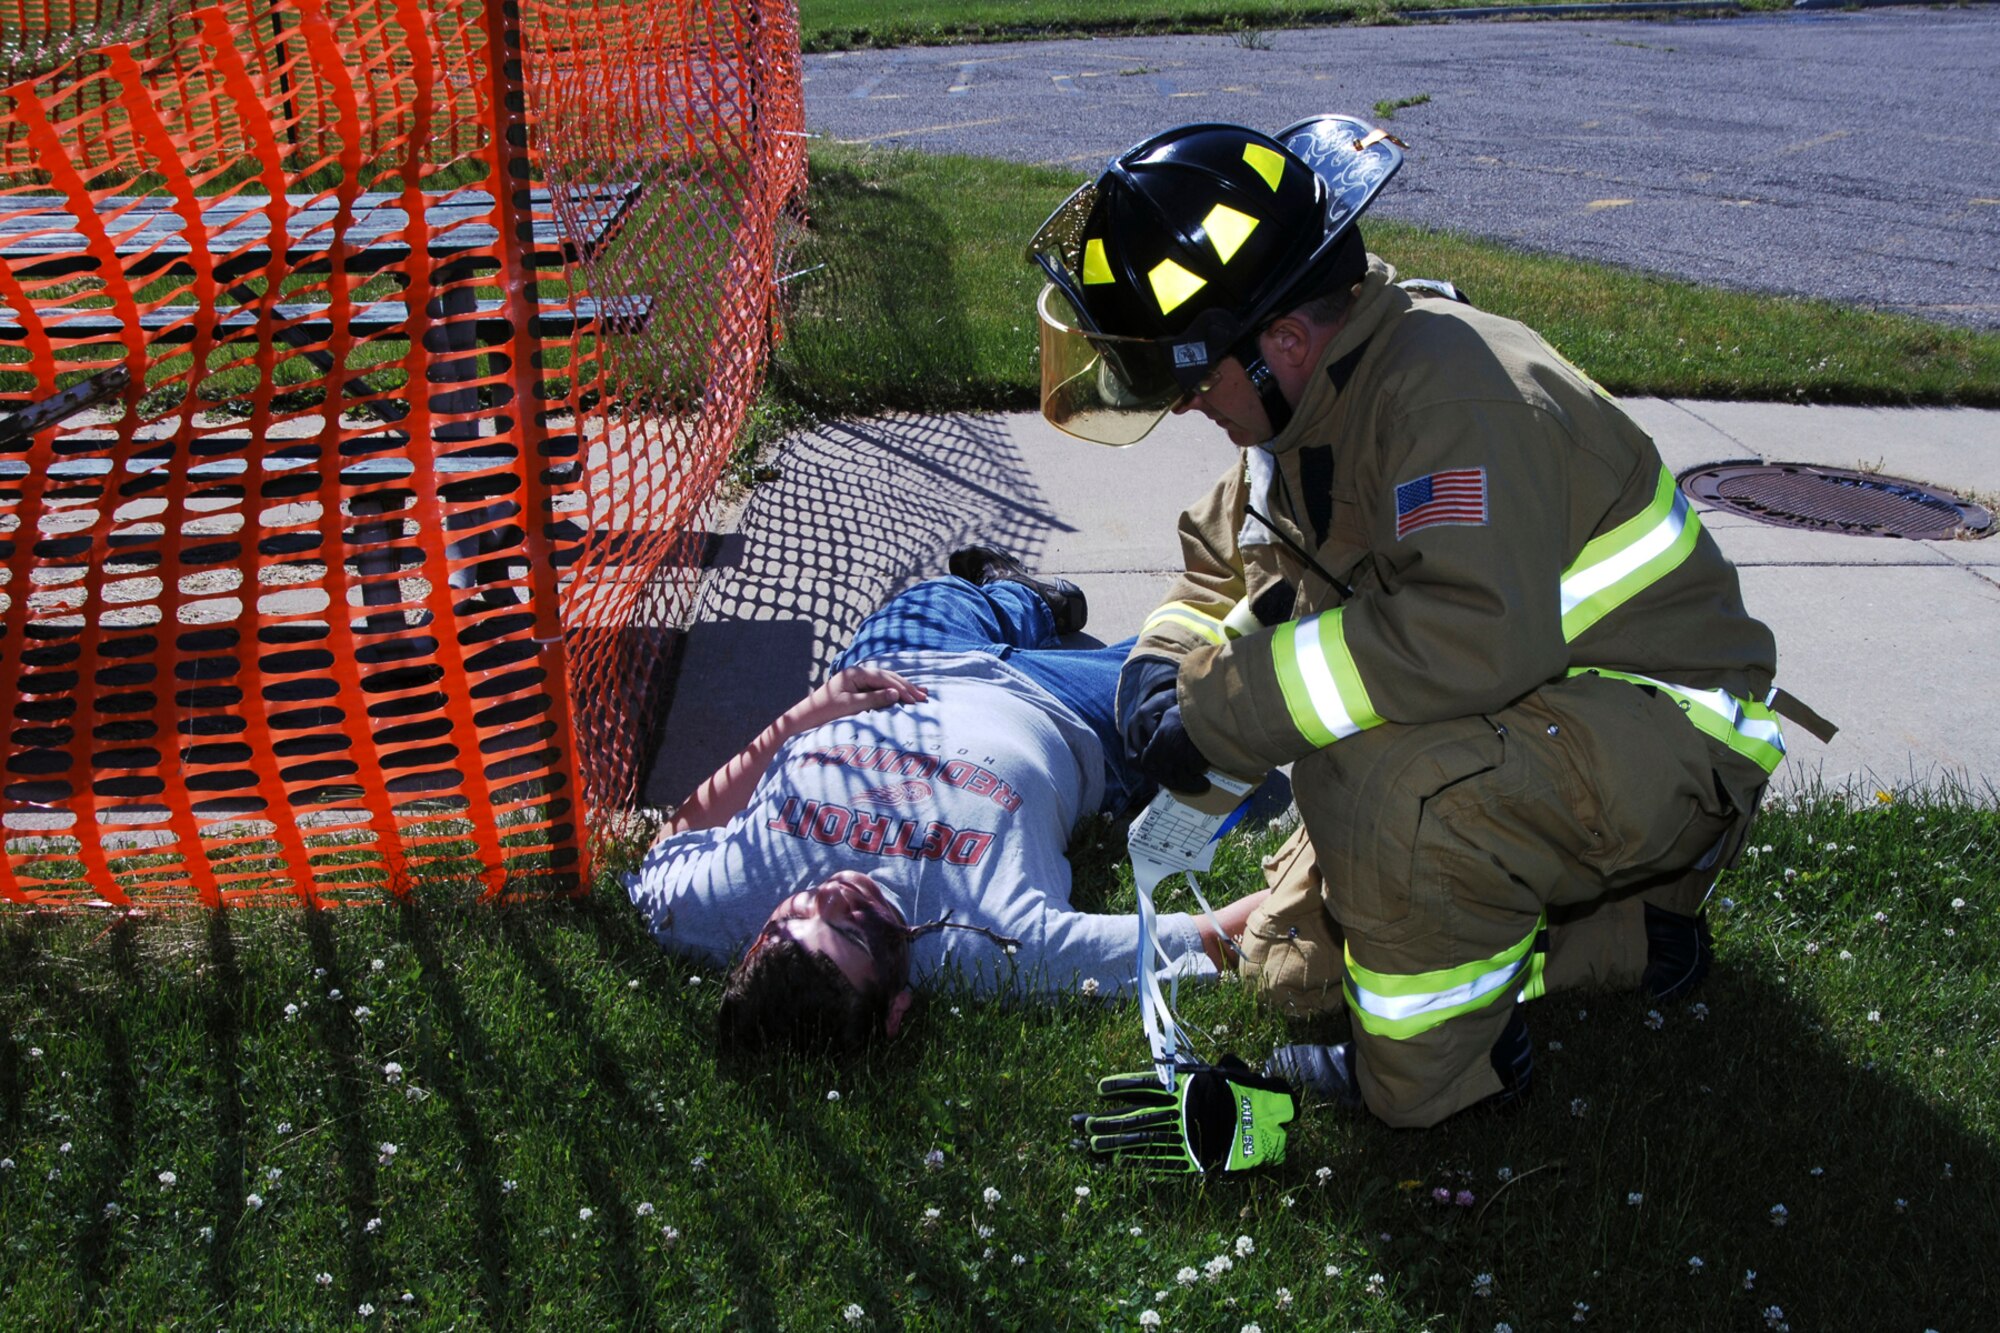 Selfridge ANG Base Firefighter, SSgt. Jeffrey Yelencich, aids a simulated casualty portrayed by Civil Air Patrol member Jake Healy during a tornado response exercise held by the 127th Wing at Selfridge Air National Guard Base on June 1. (USAF Photo by SSgt. Rachel Barton, released).